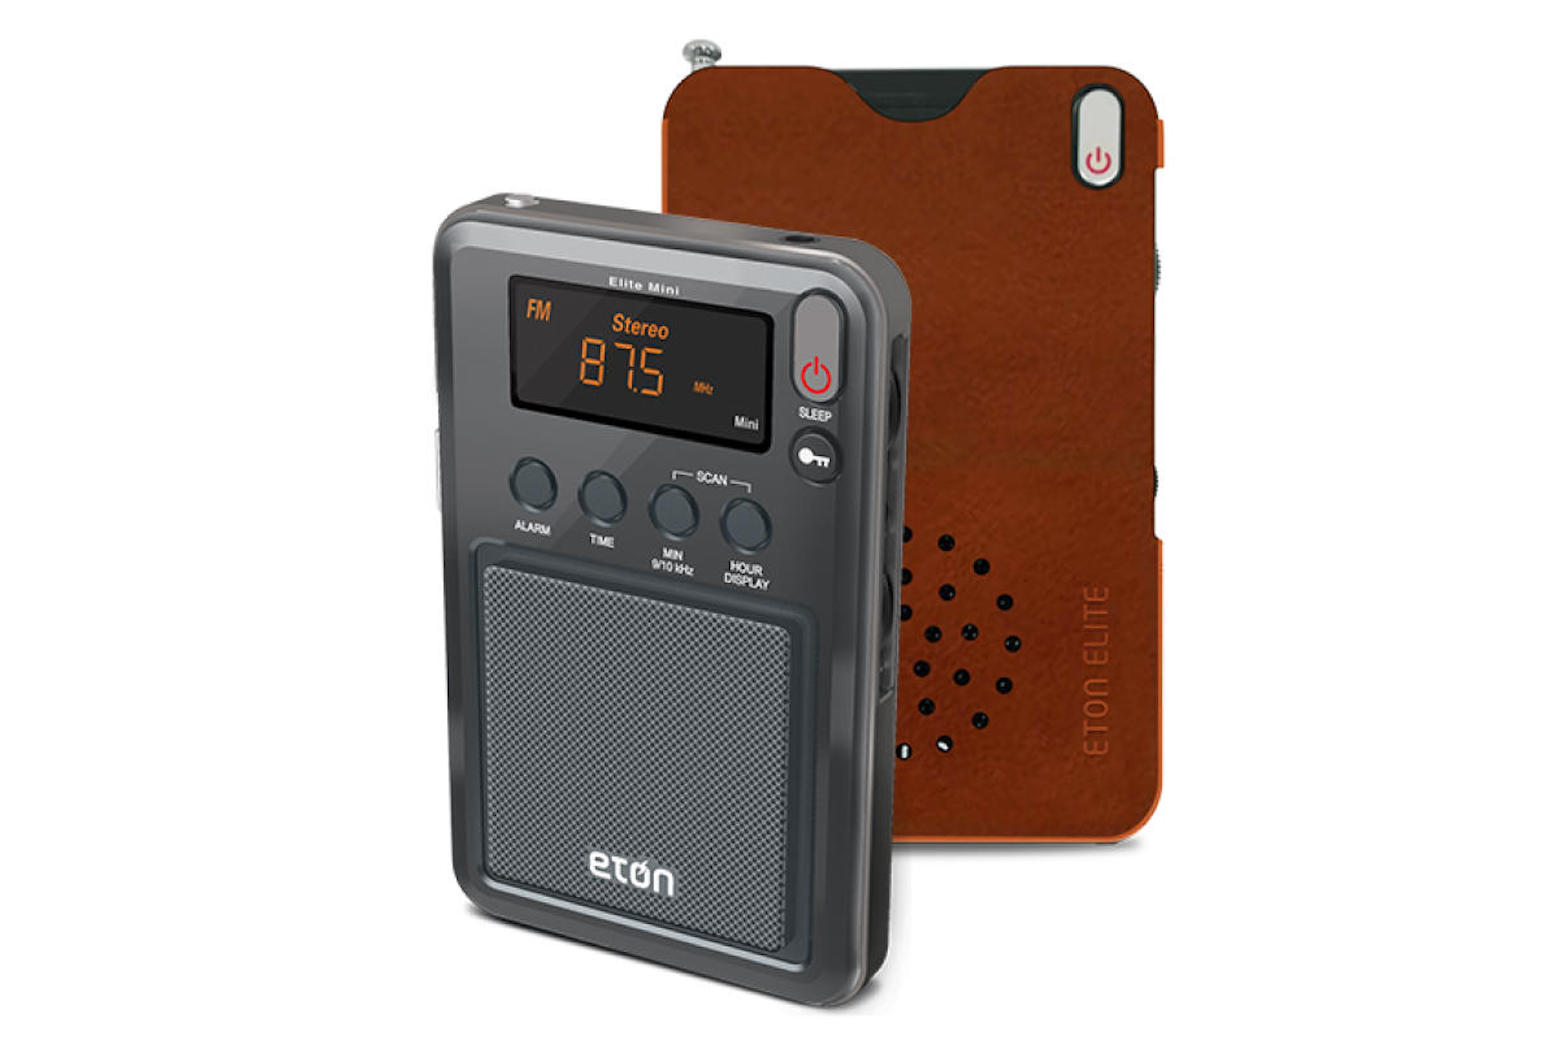 This pocket radio is more powerful than it looks